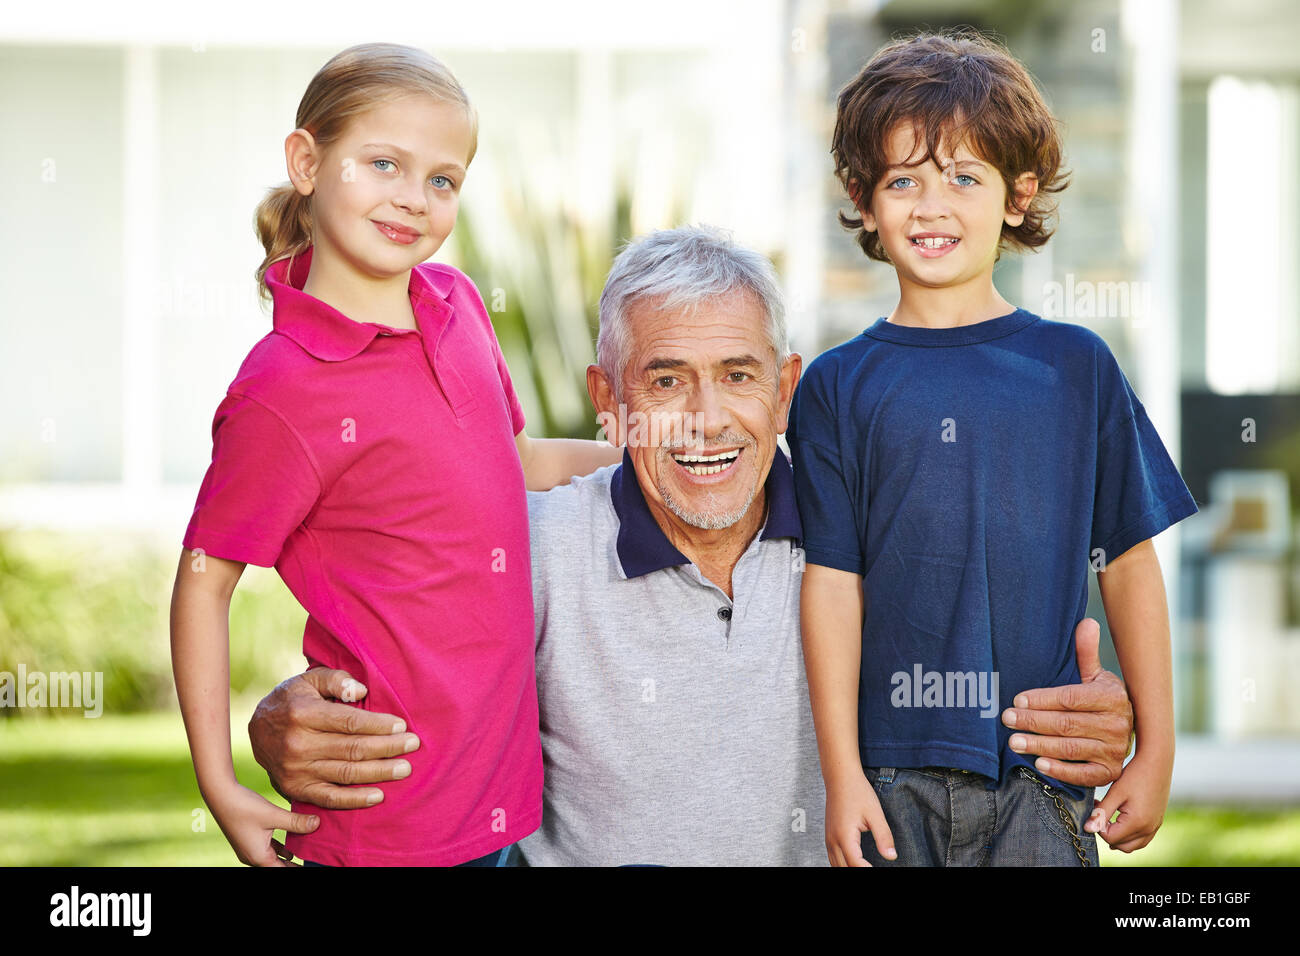 Portrait of smiling grandfather and two grandchildren in a garden Stock Photo